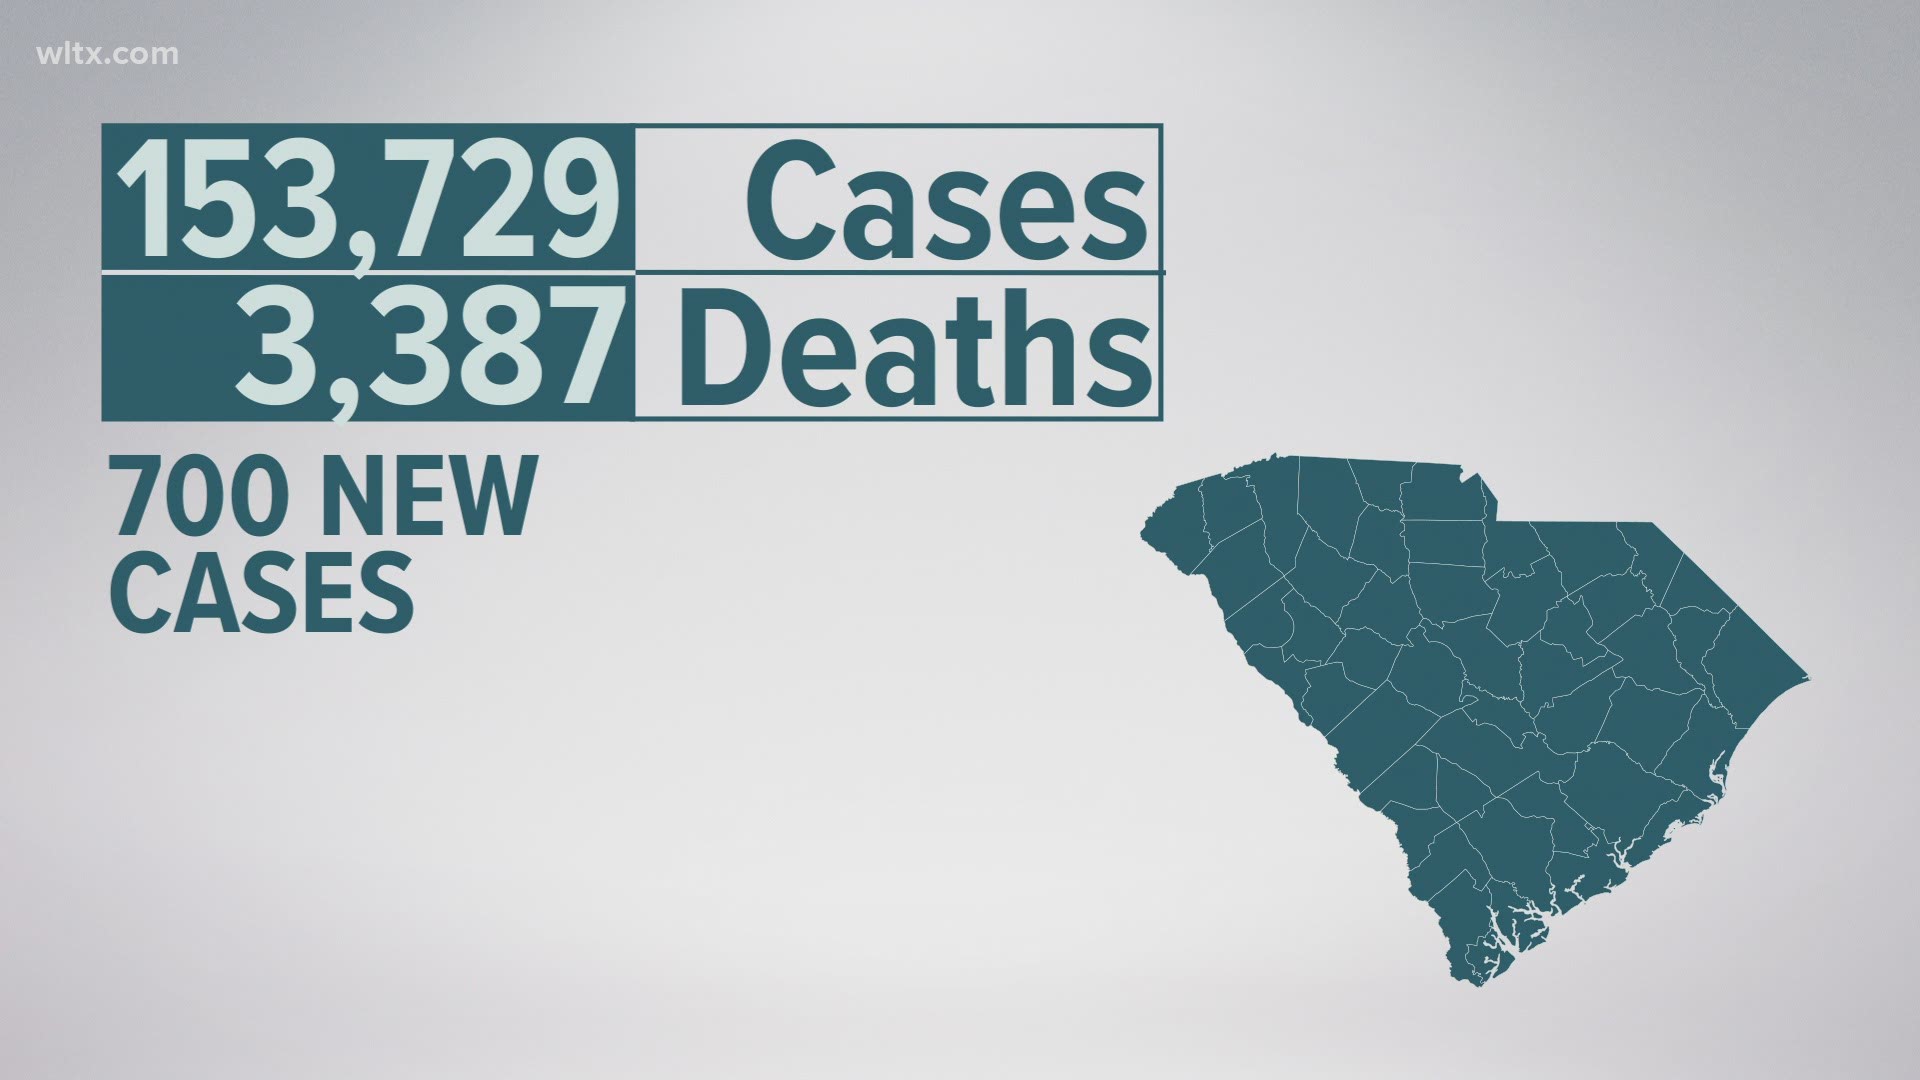 This brings the total number of confirmed cases to 153,729, probable cases to 6,080, confirmed deaths to 3,387, and 206 probable deaths.